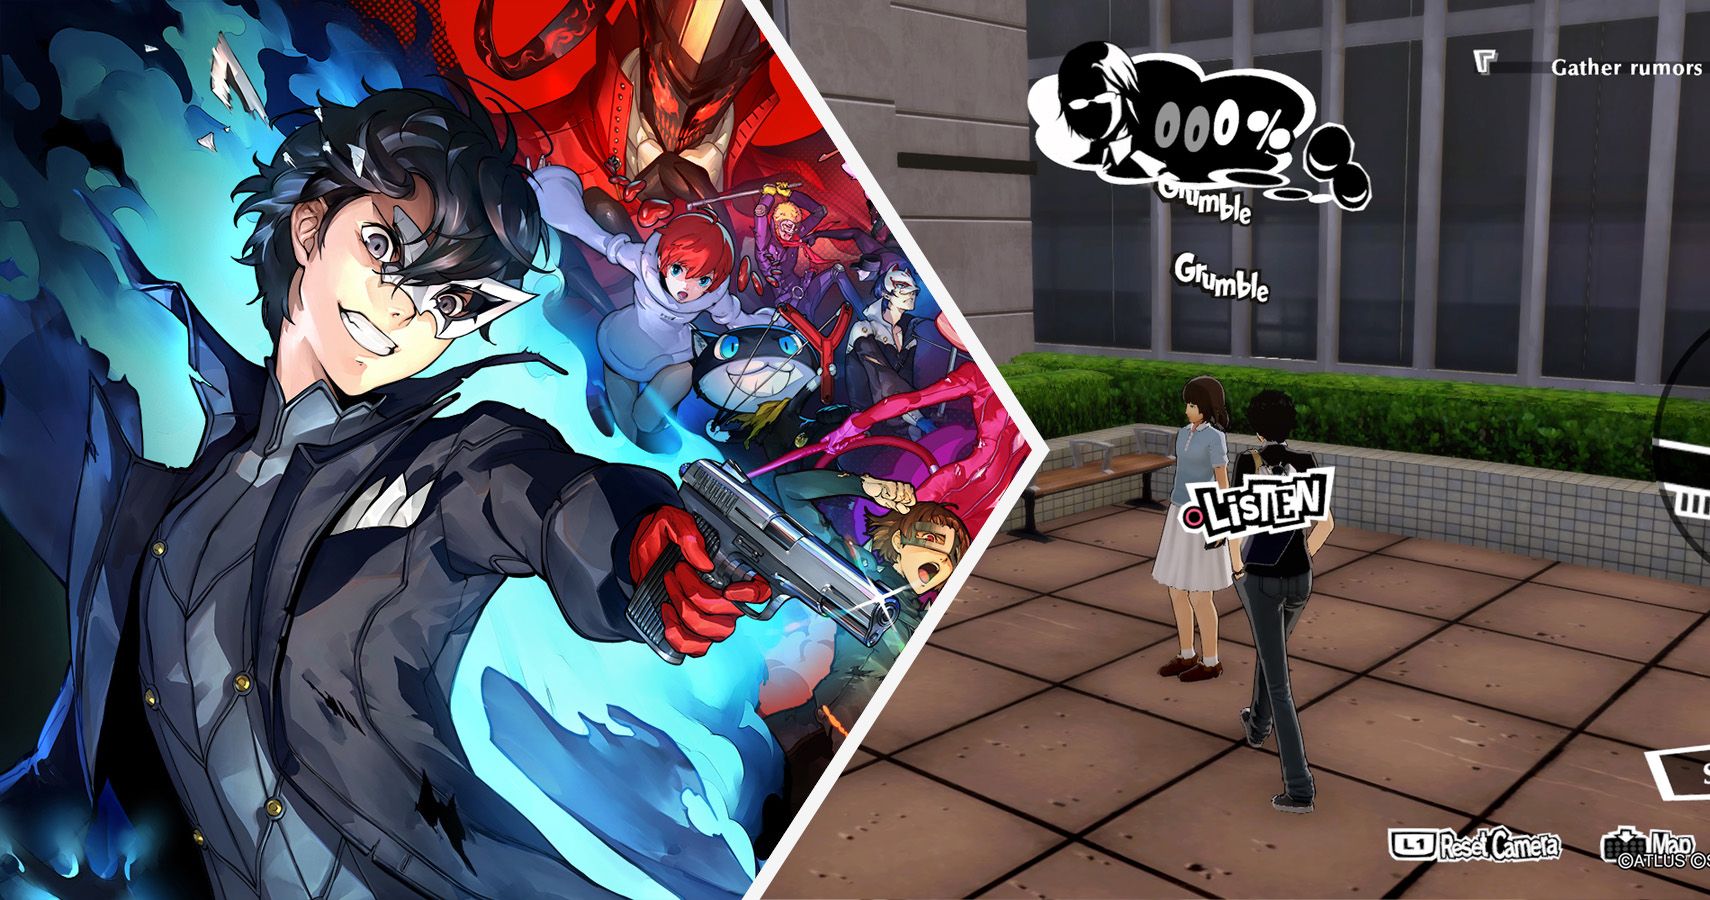 Persona 5 Strikers has a lot of Persona DNA - Polygon